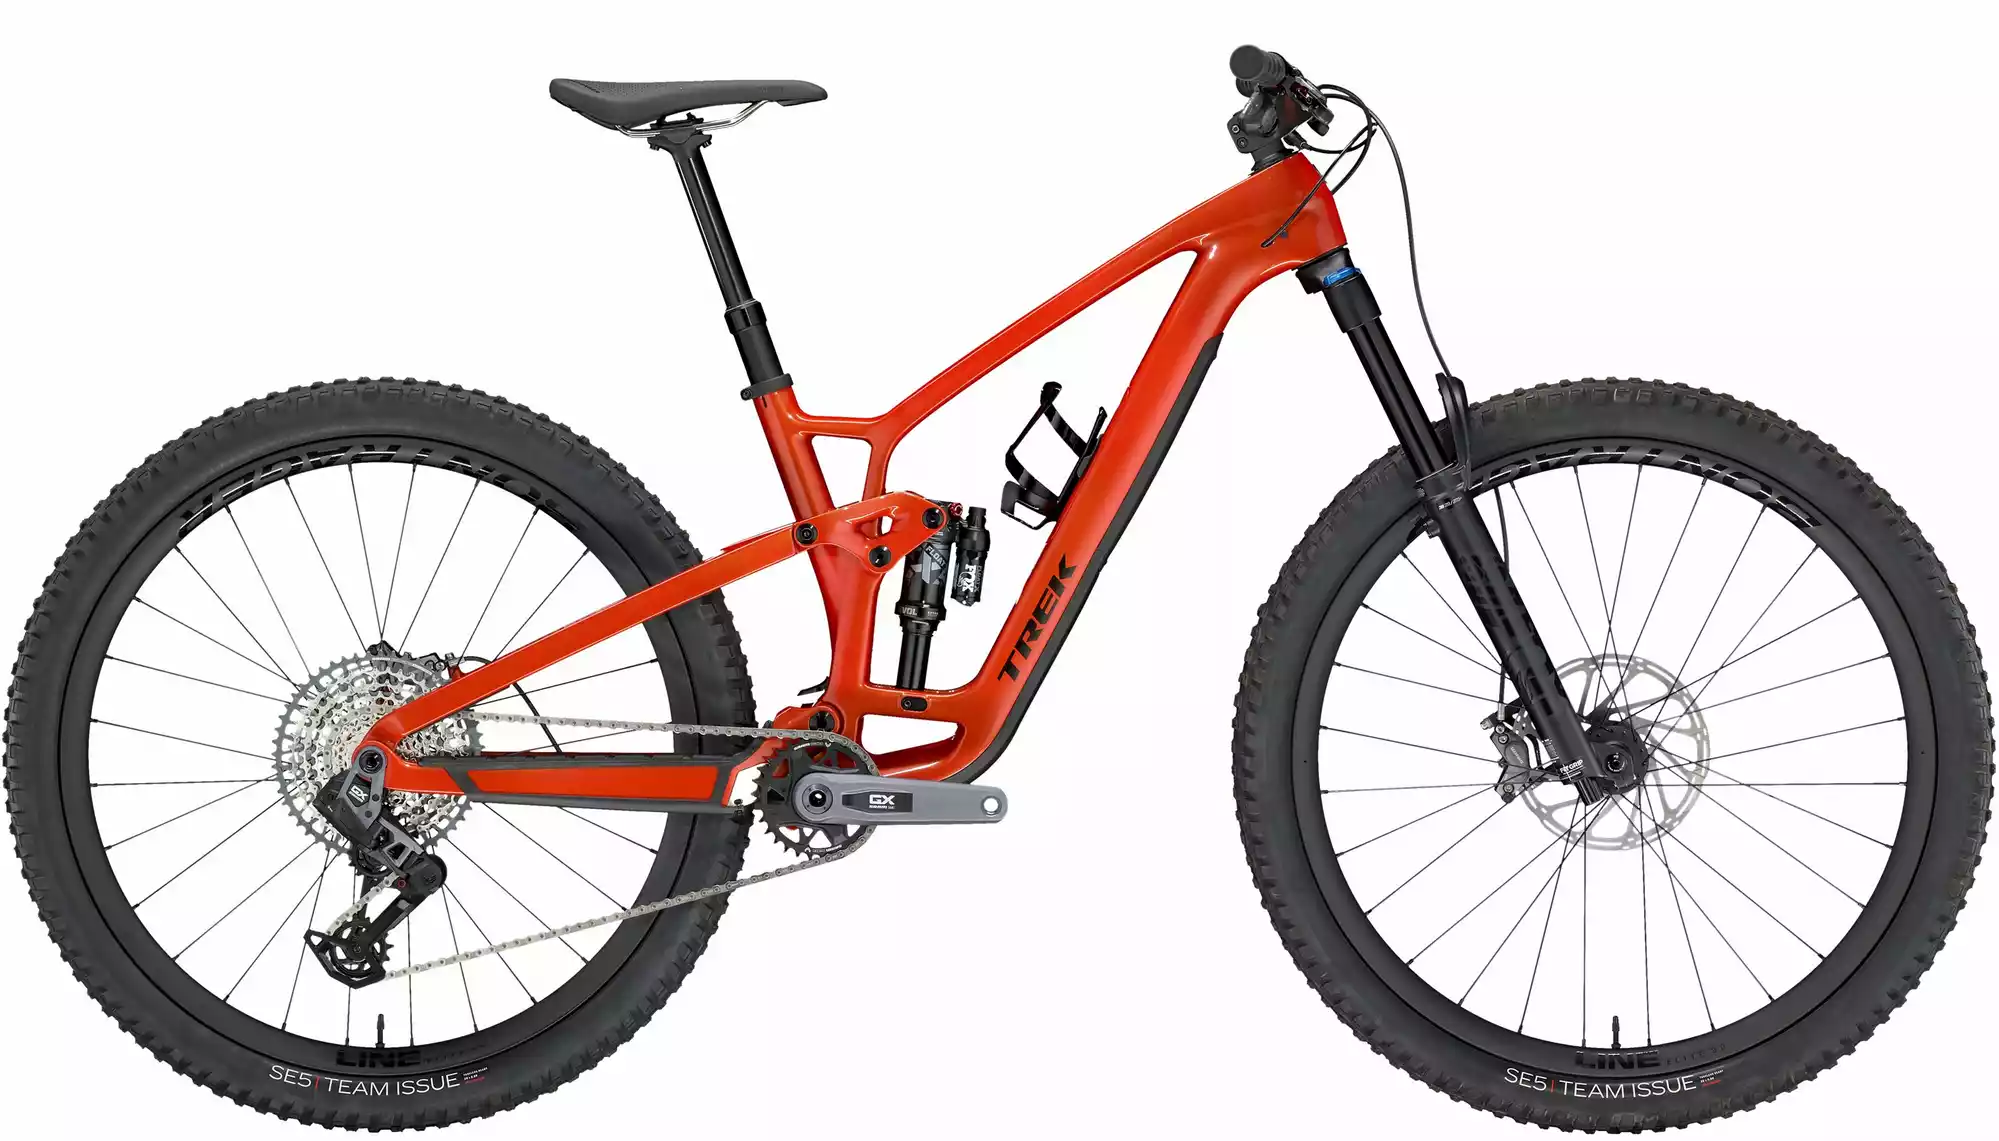 A mountain bike is shown against a white background.